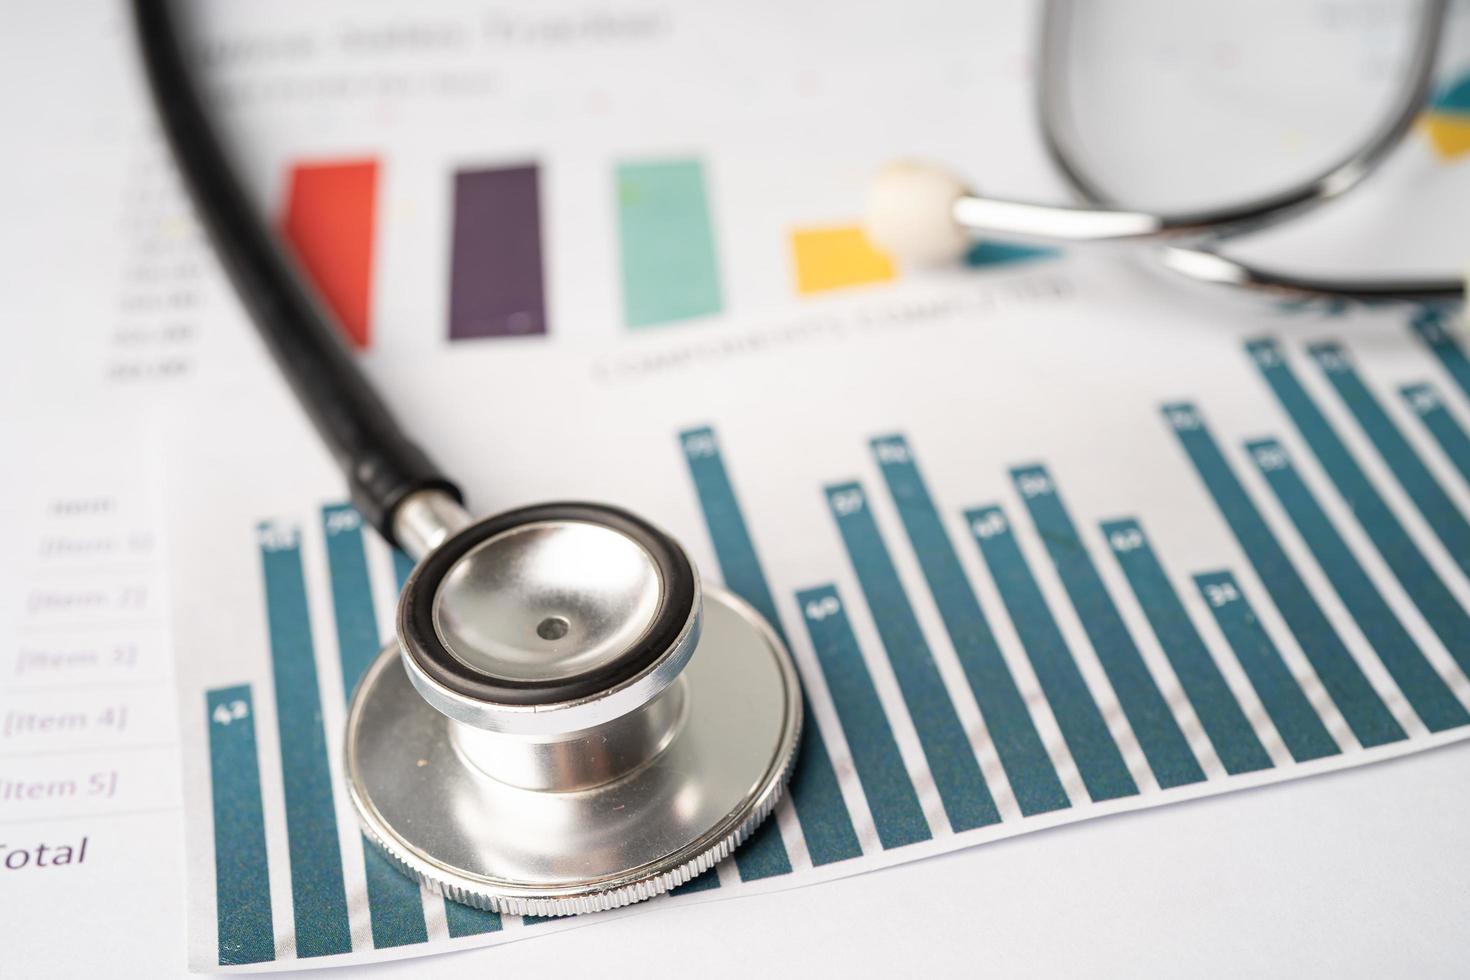 Stethoscope on charts and graphs paper, Finance, Account, Statistics, Investment, Analytic research data economy and Business company concept. photo